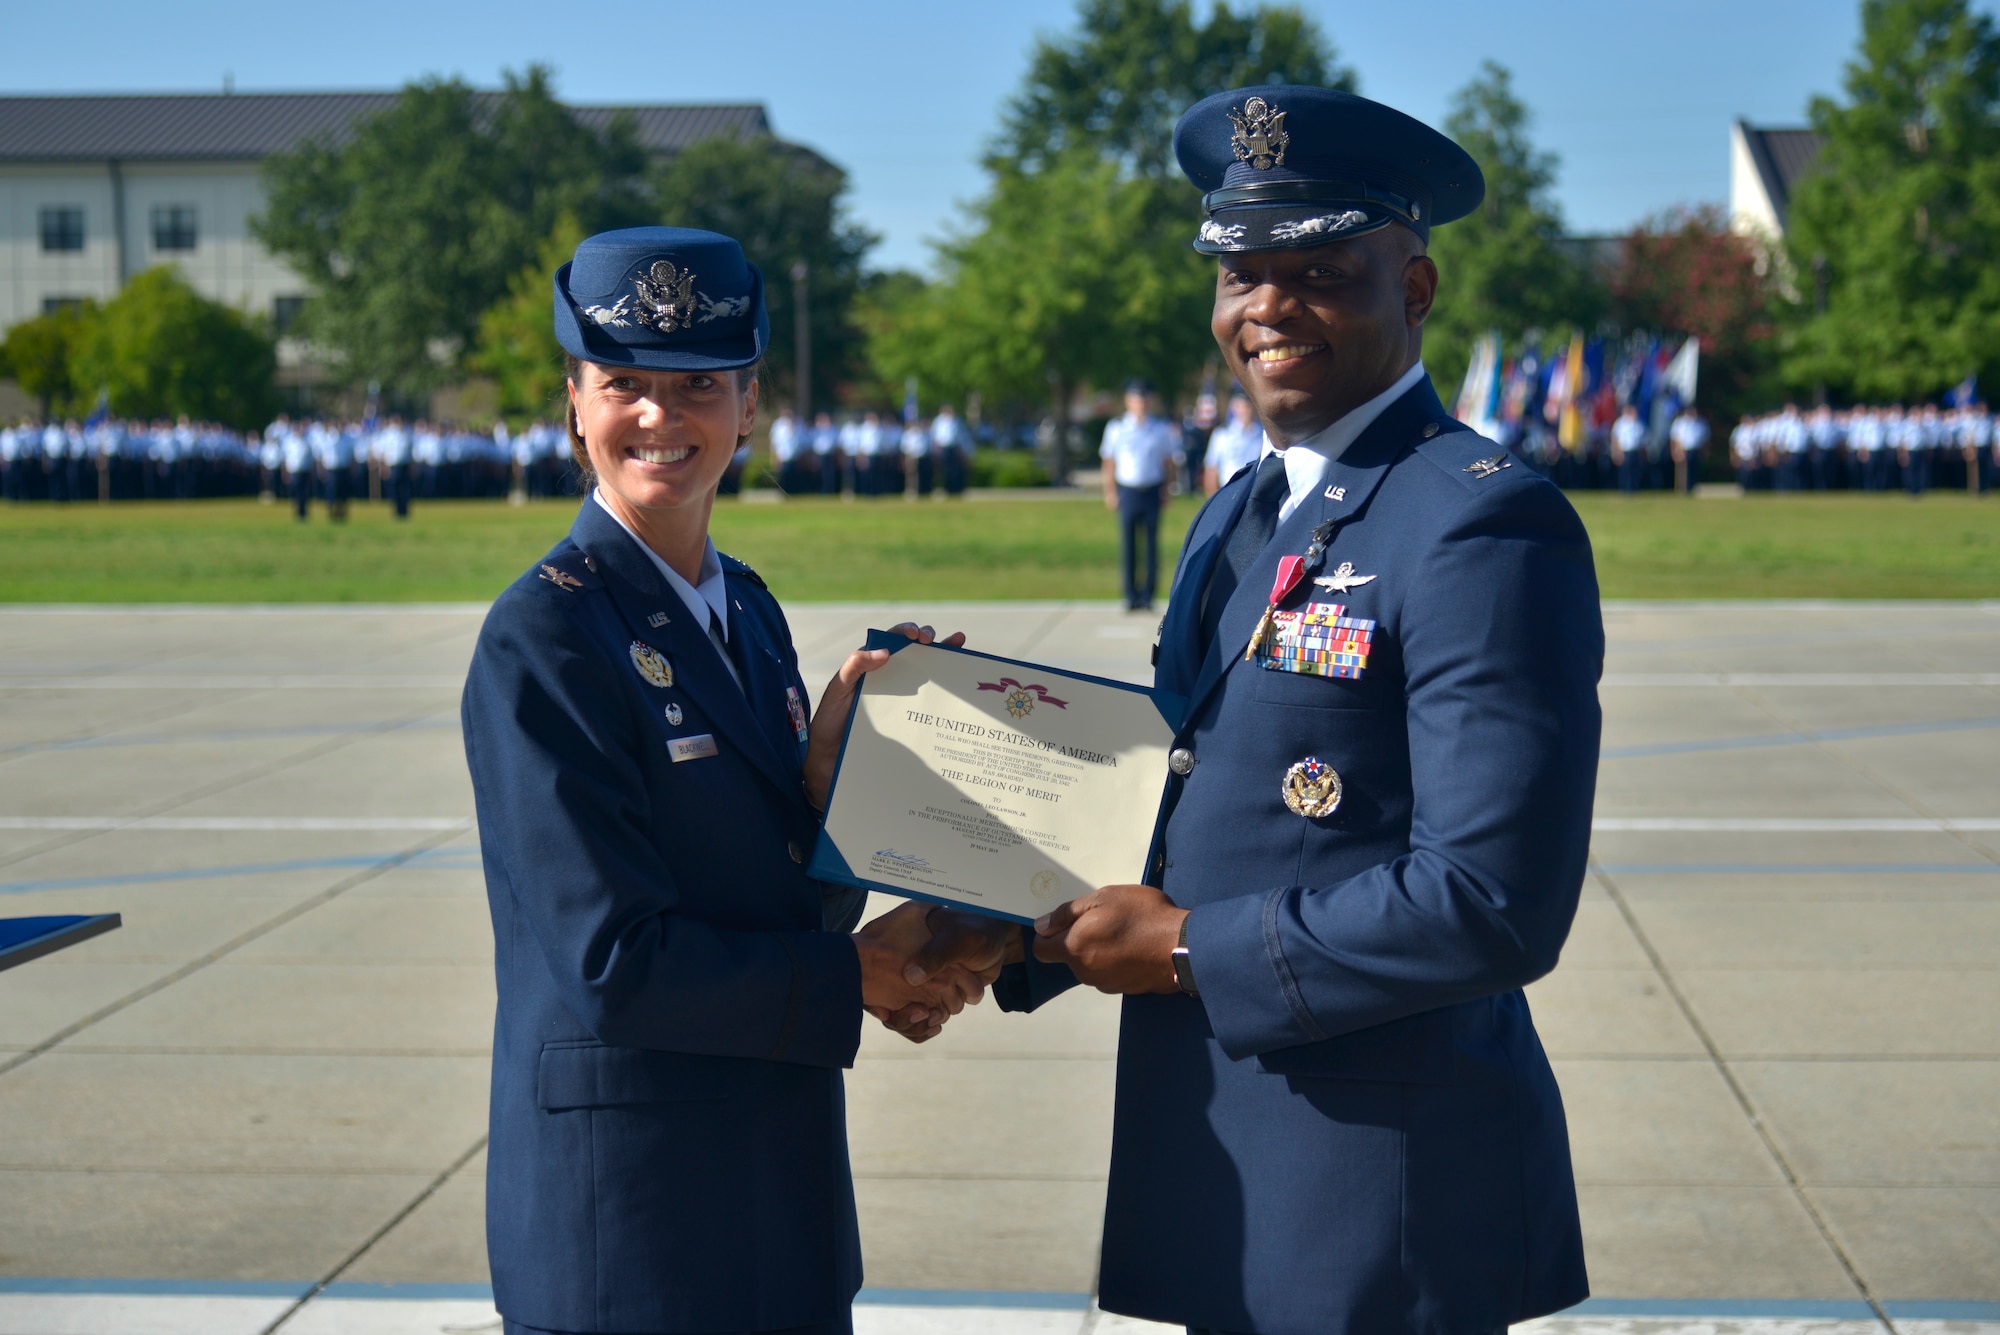 U.S. Air Force Col. Heather Blackwell, 81st Training Wing commander, presents the Legion of Merit award to Col. Leo Lawson Jr., outgoing 81st Training Group commander, during the 81st TRG change of command ceremony at the Levitow Training Support Facility drill pad at Keesler Air Force Base, Mississippi, July 1, 2019. Lawson's next assignment is to United States Transportation Command. (U.S. Air Force photo by Airman Seth Haddix)